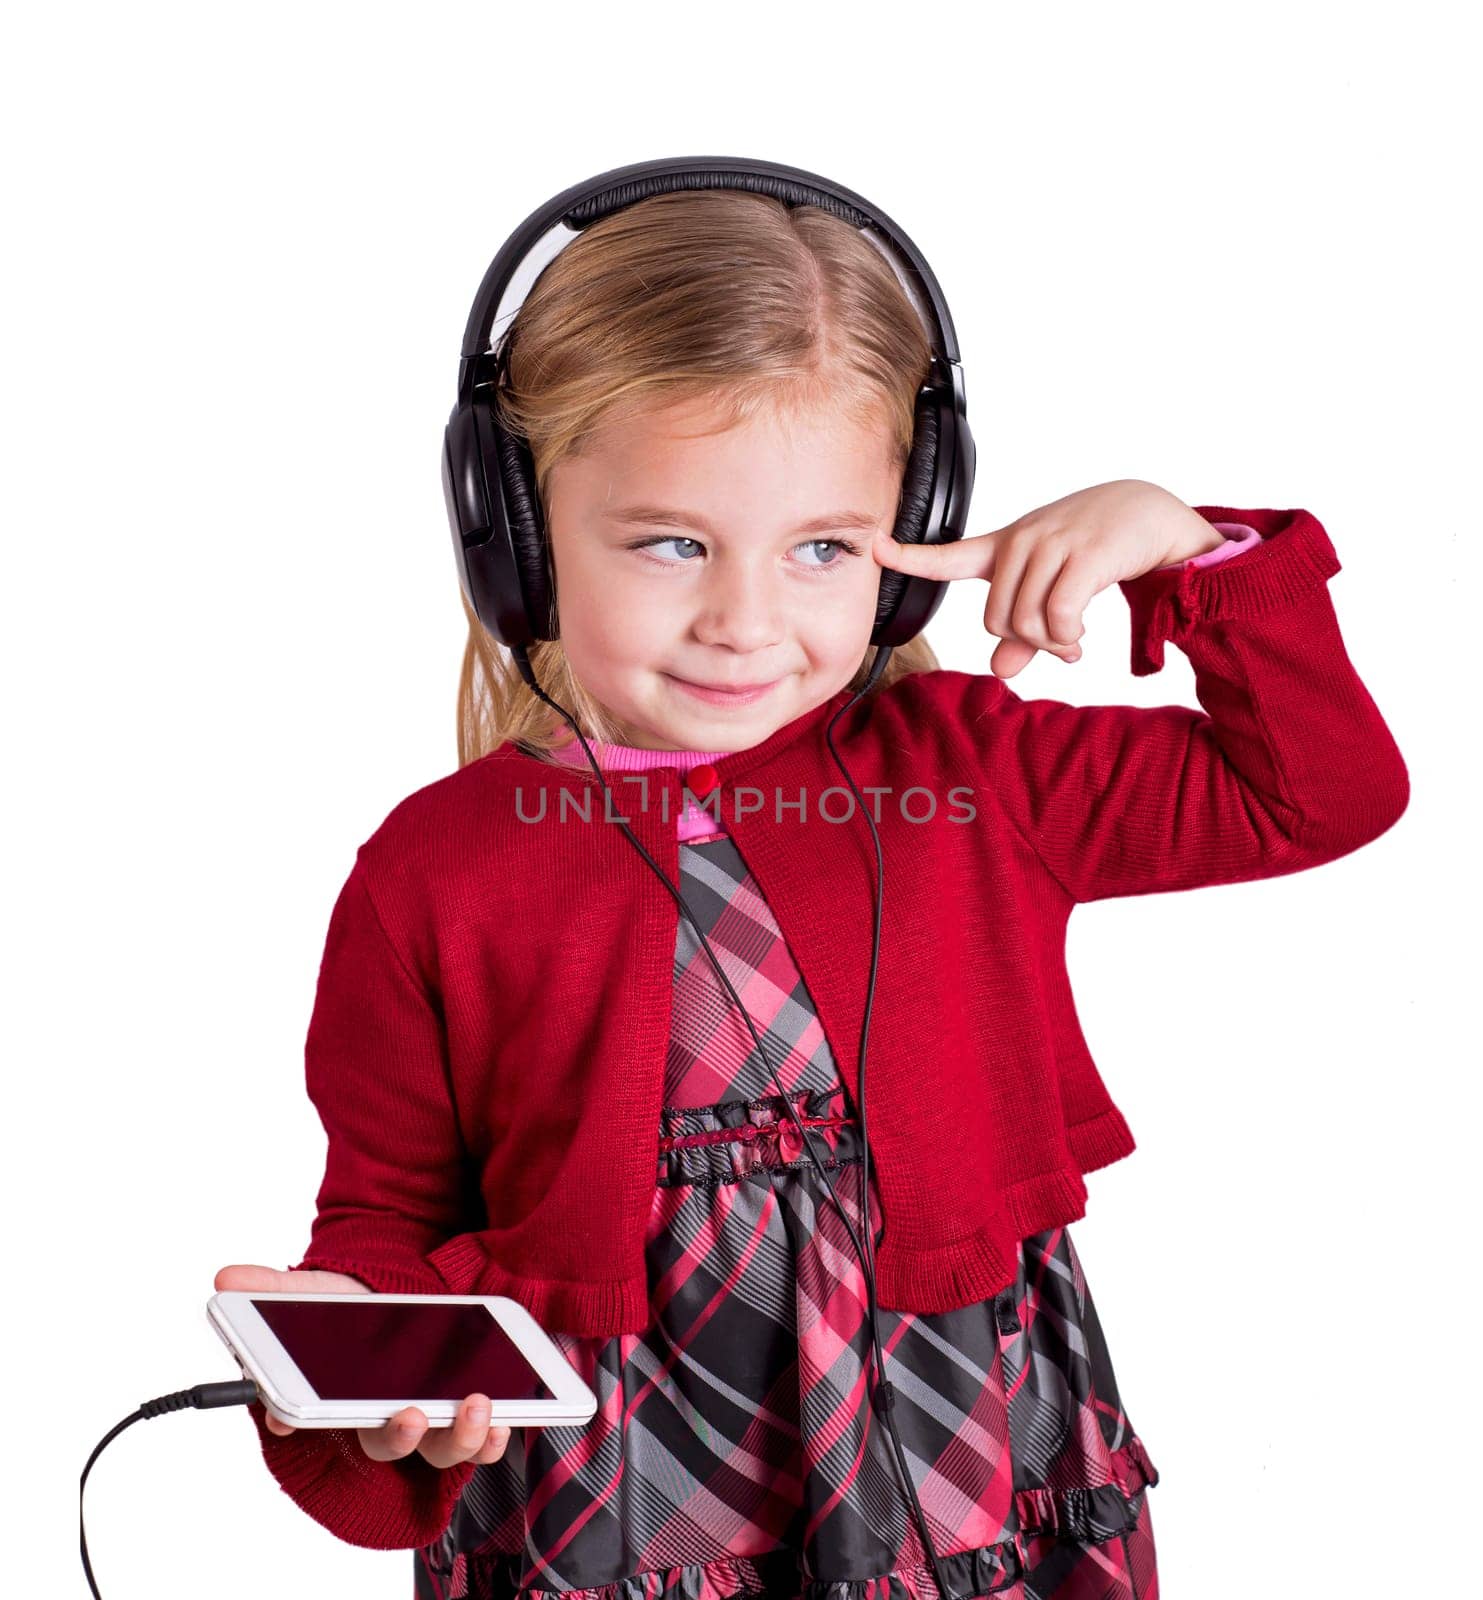 Little blonde girl smiling listening to music on smart phone mobile device with headphones